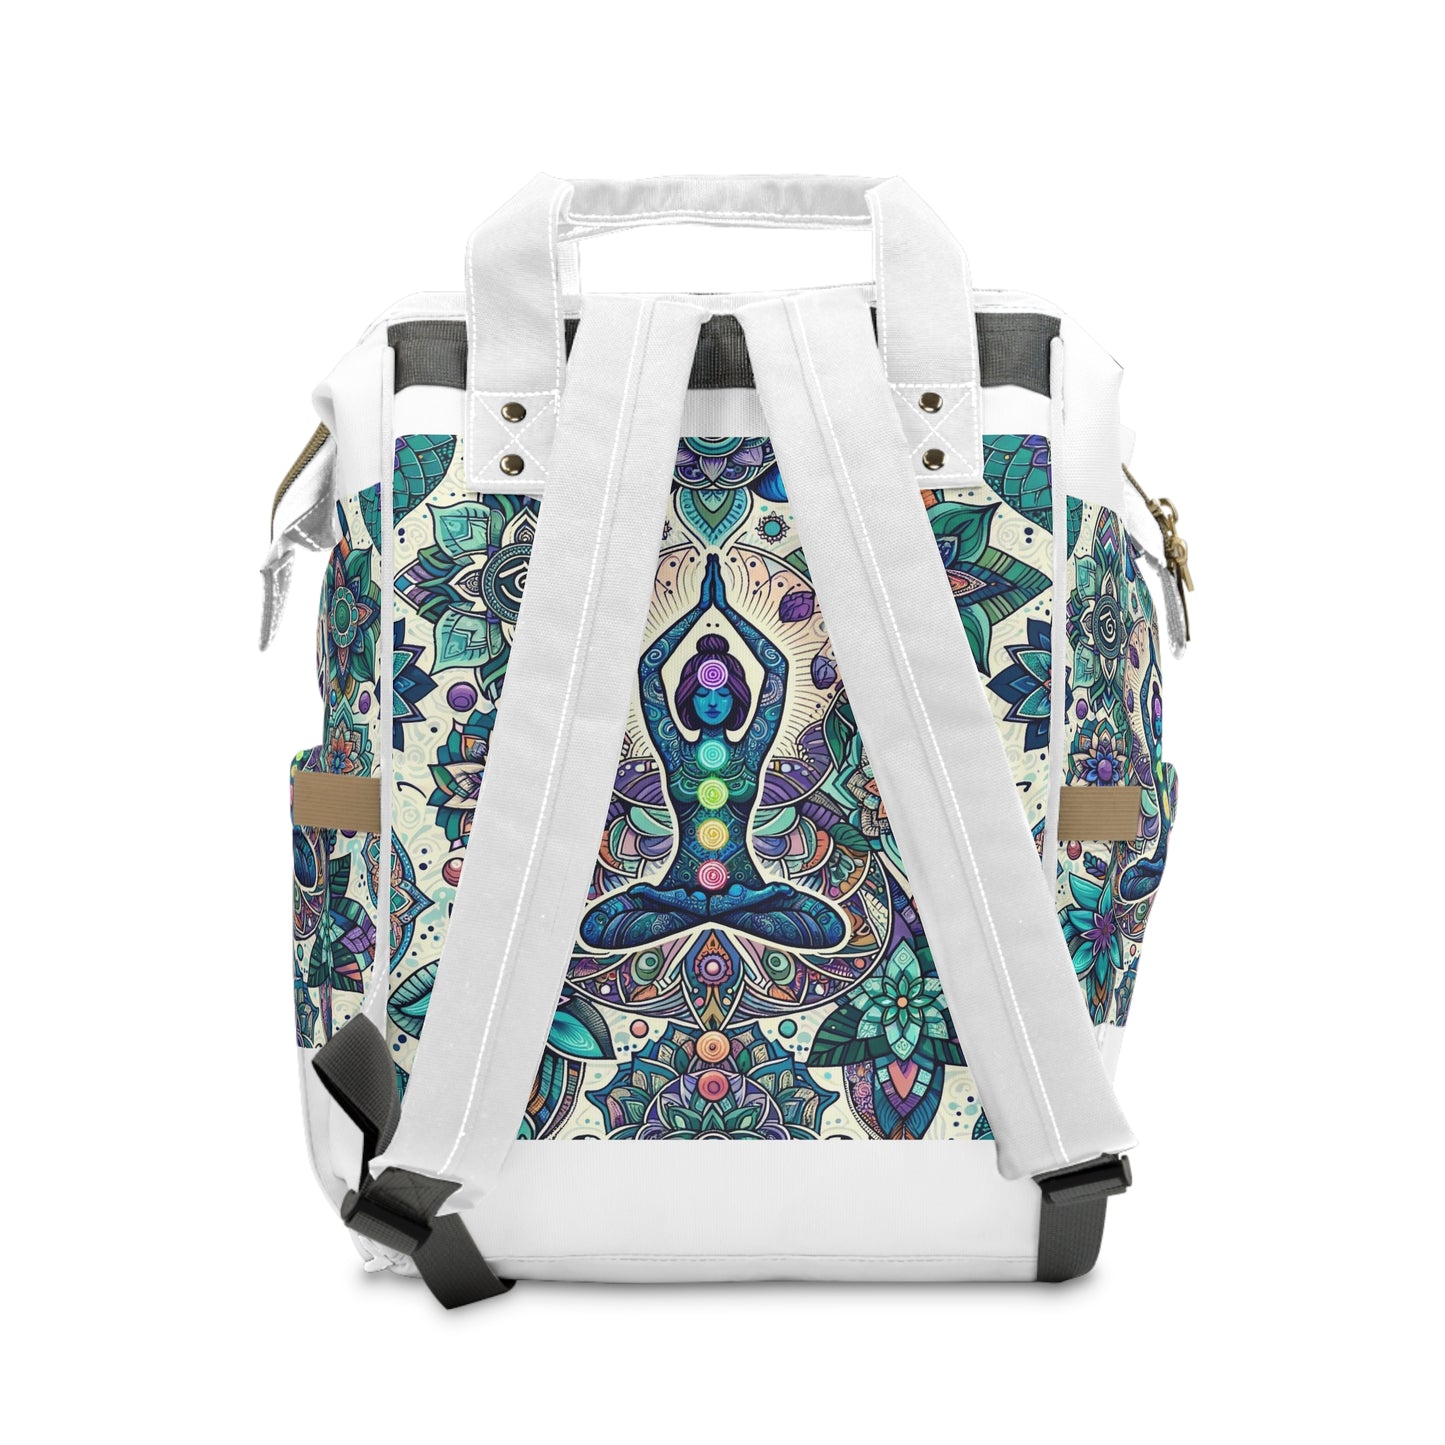 -Multifunctional Diaper Backpack with Serene Meditation and Flower of Life Design